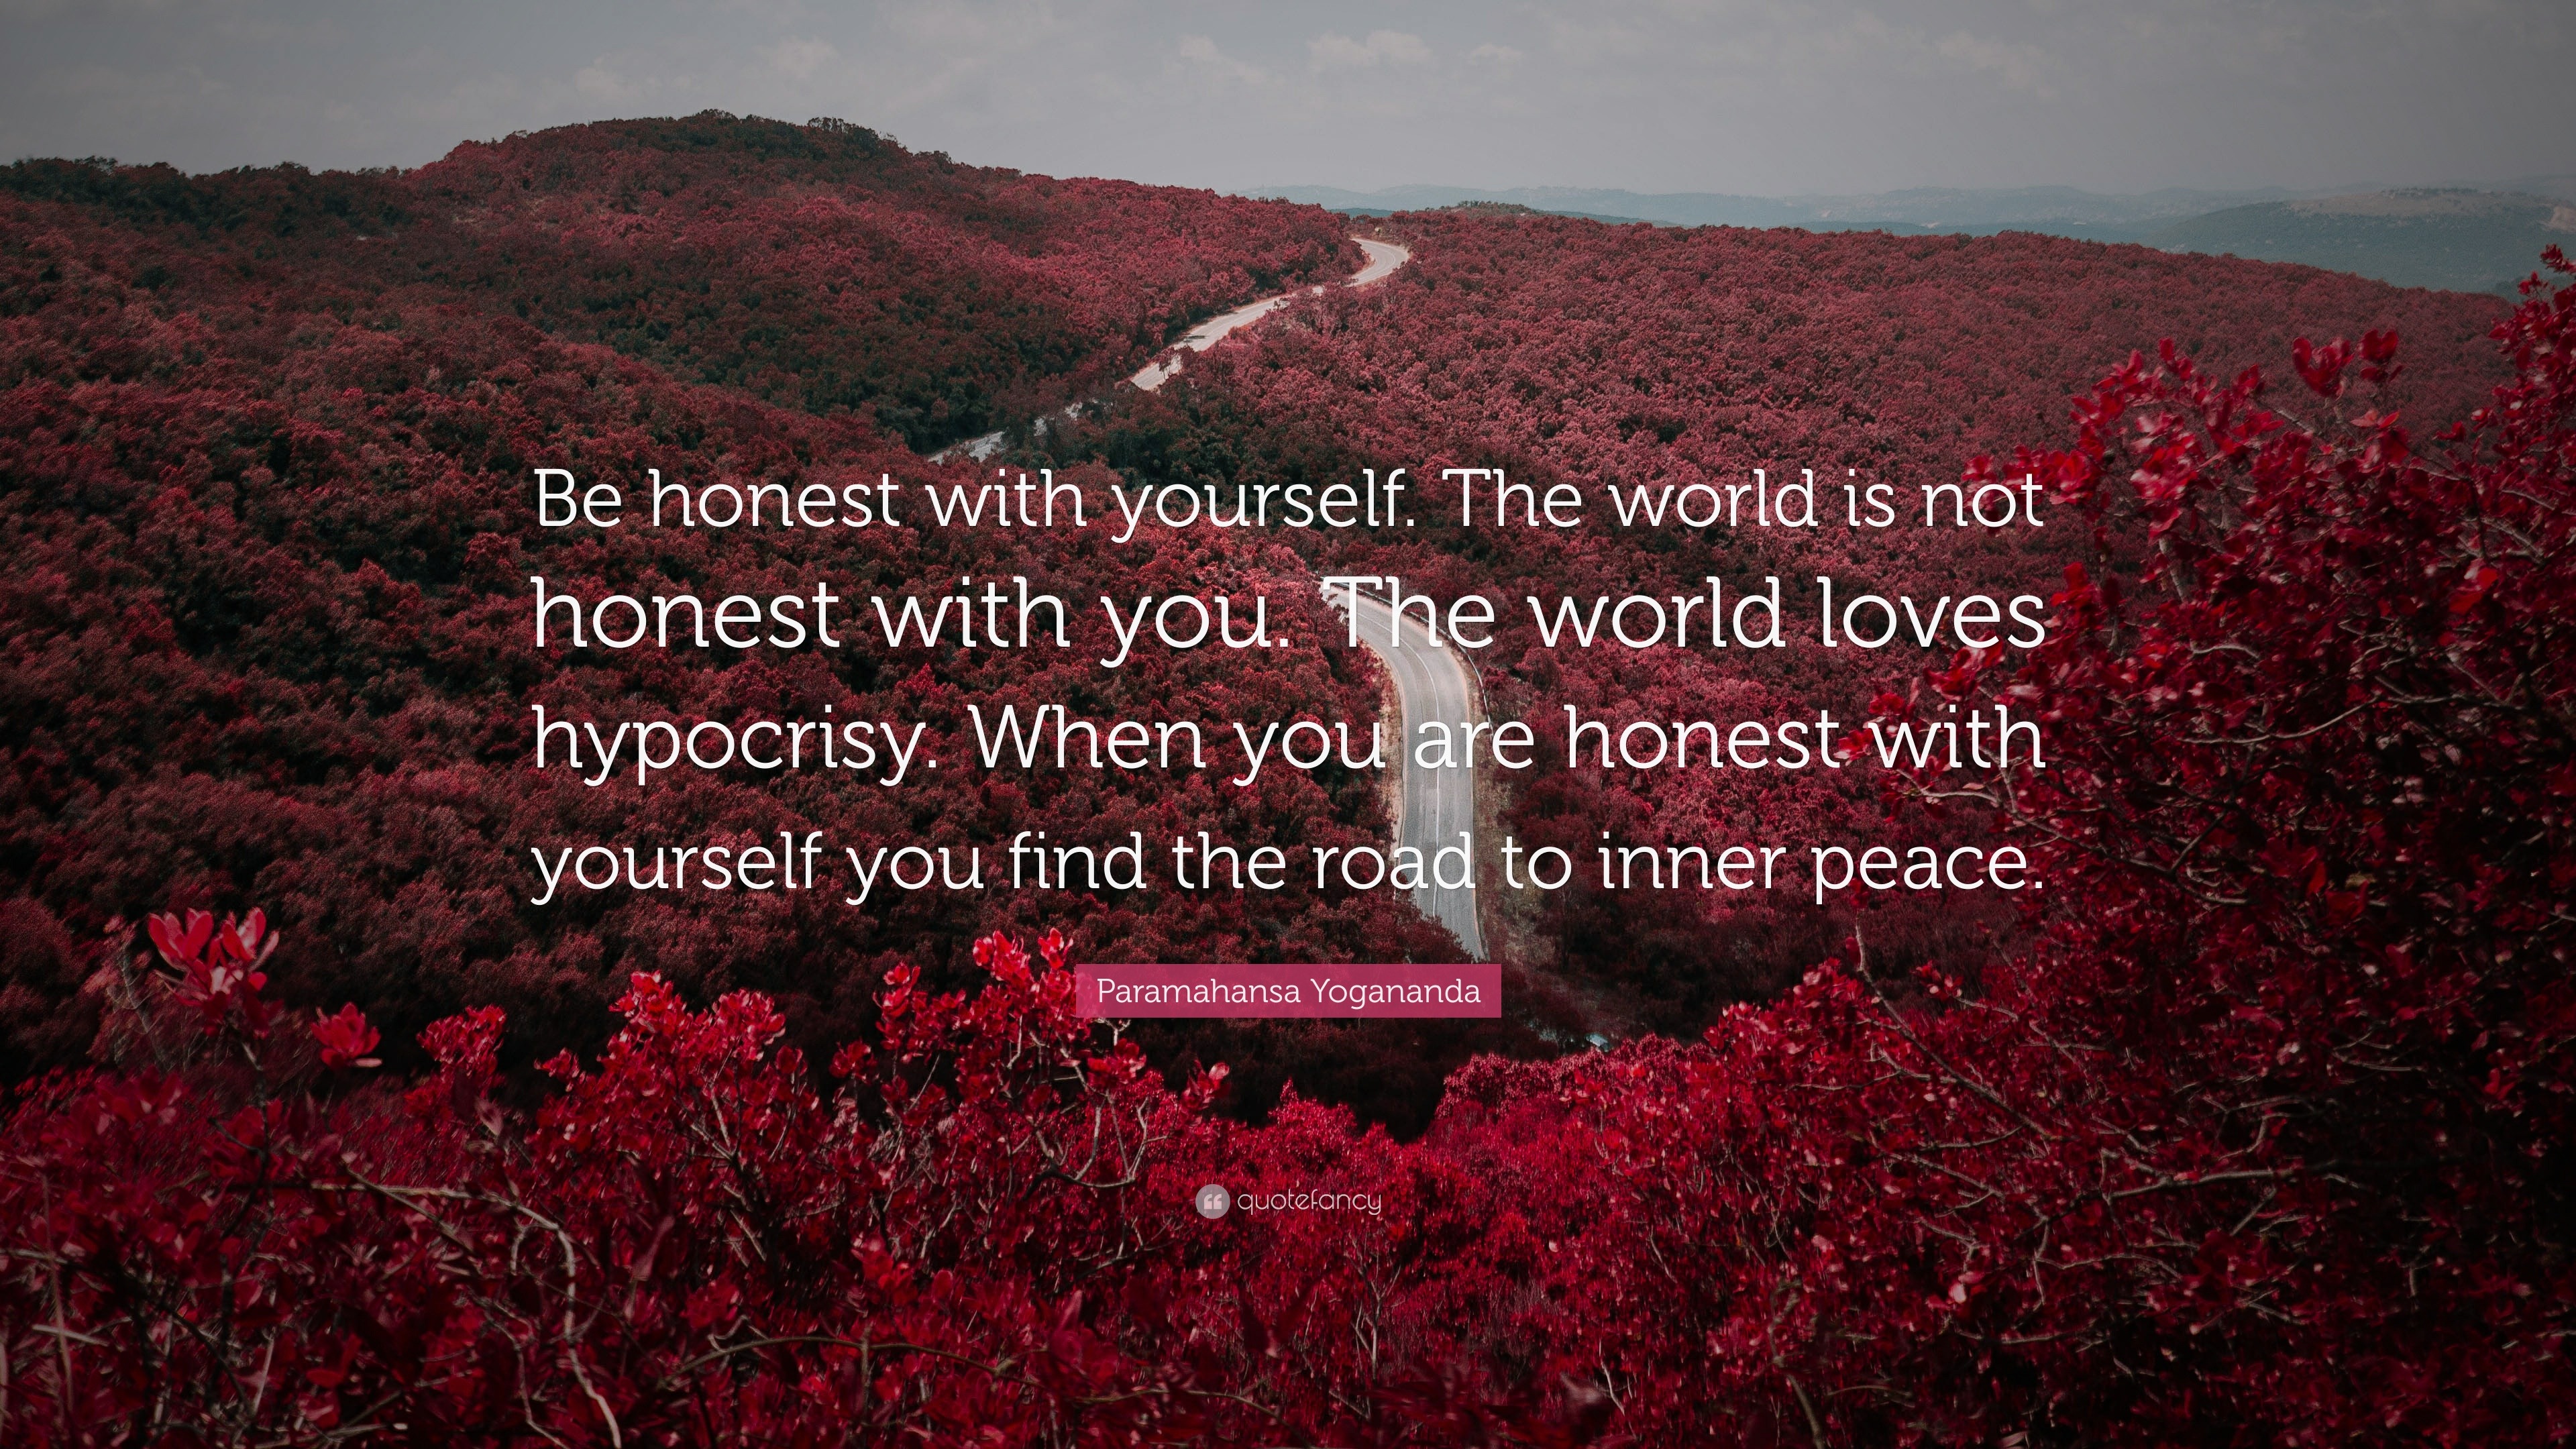 64556 Paramahansa Yogananda Quote Be honest with yourself The world is